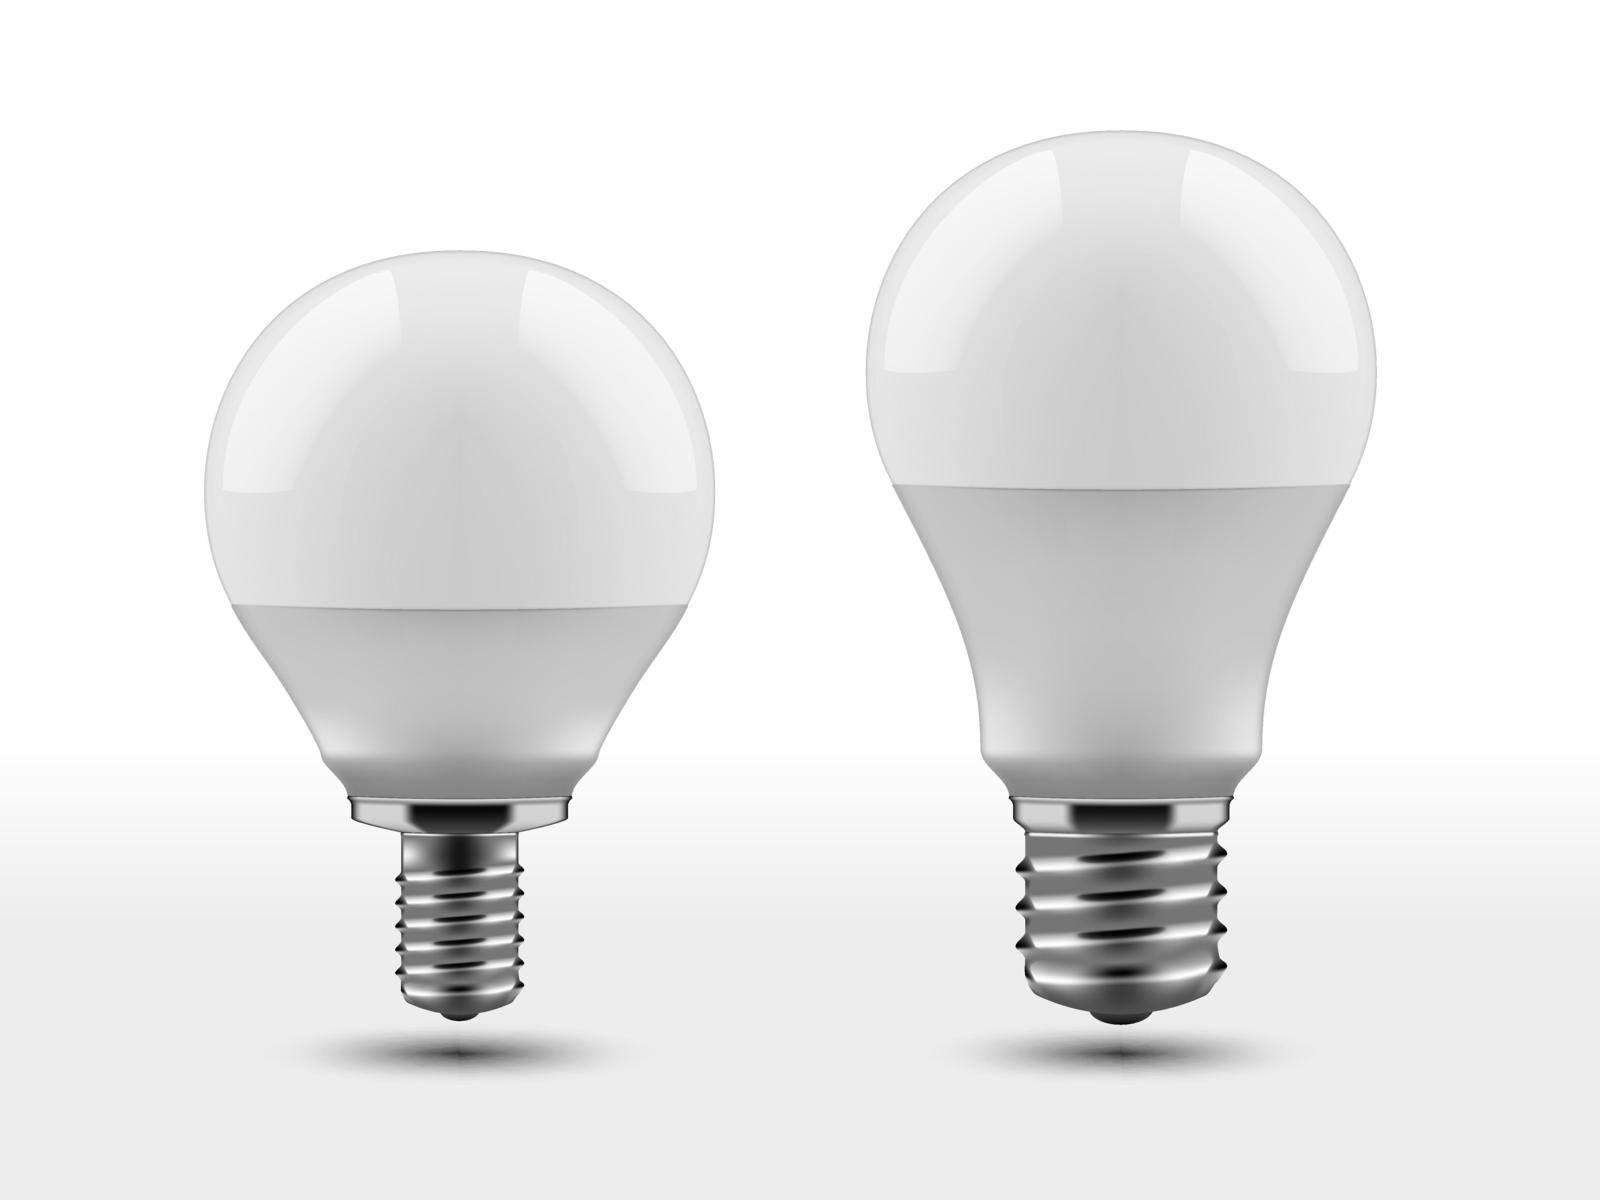 3D LED Light Bulb With Shadow On White Background by VectorThings